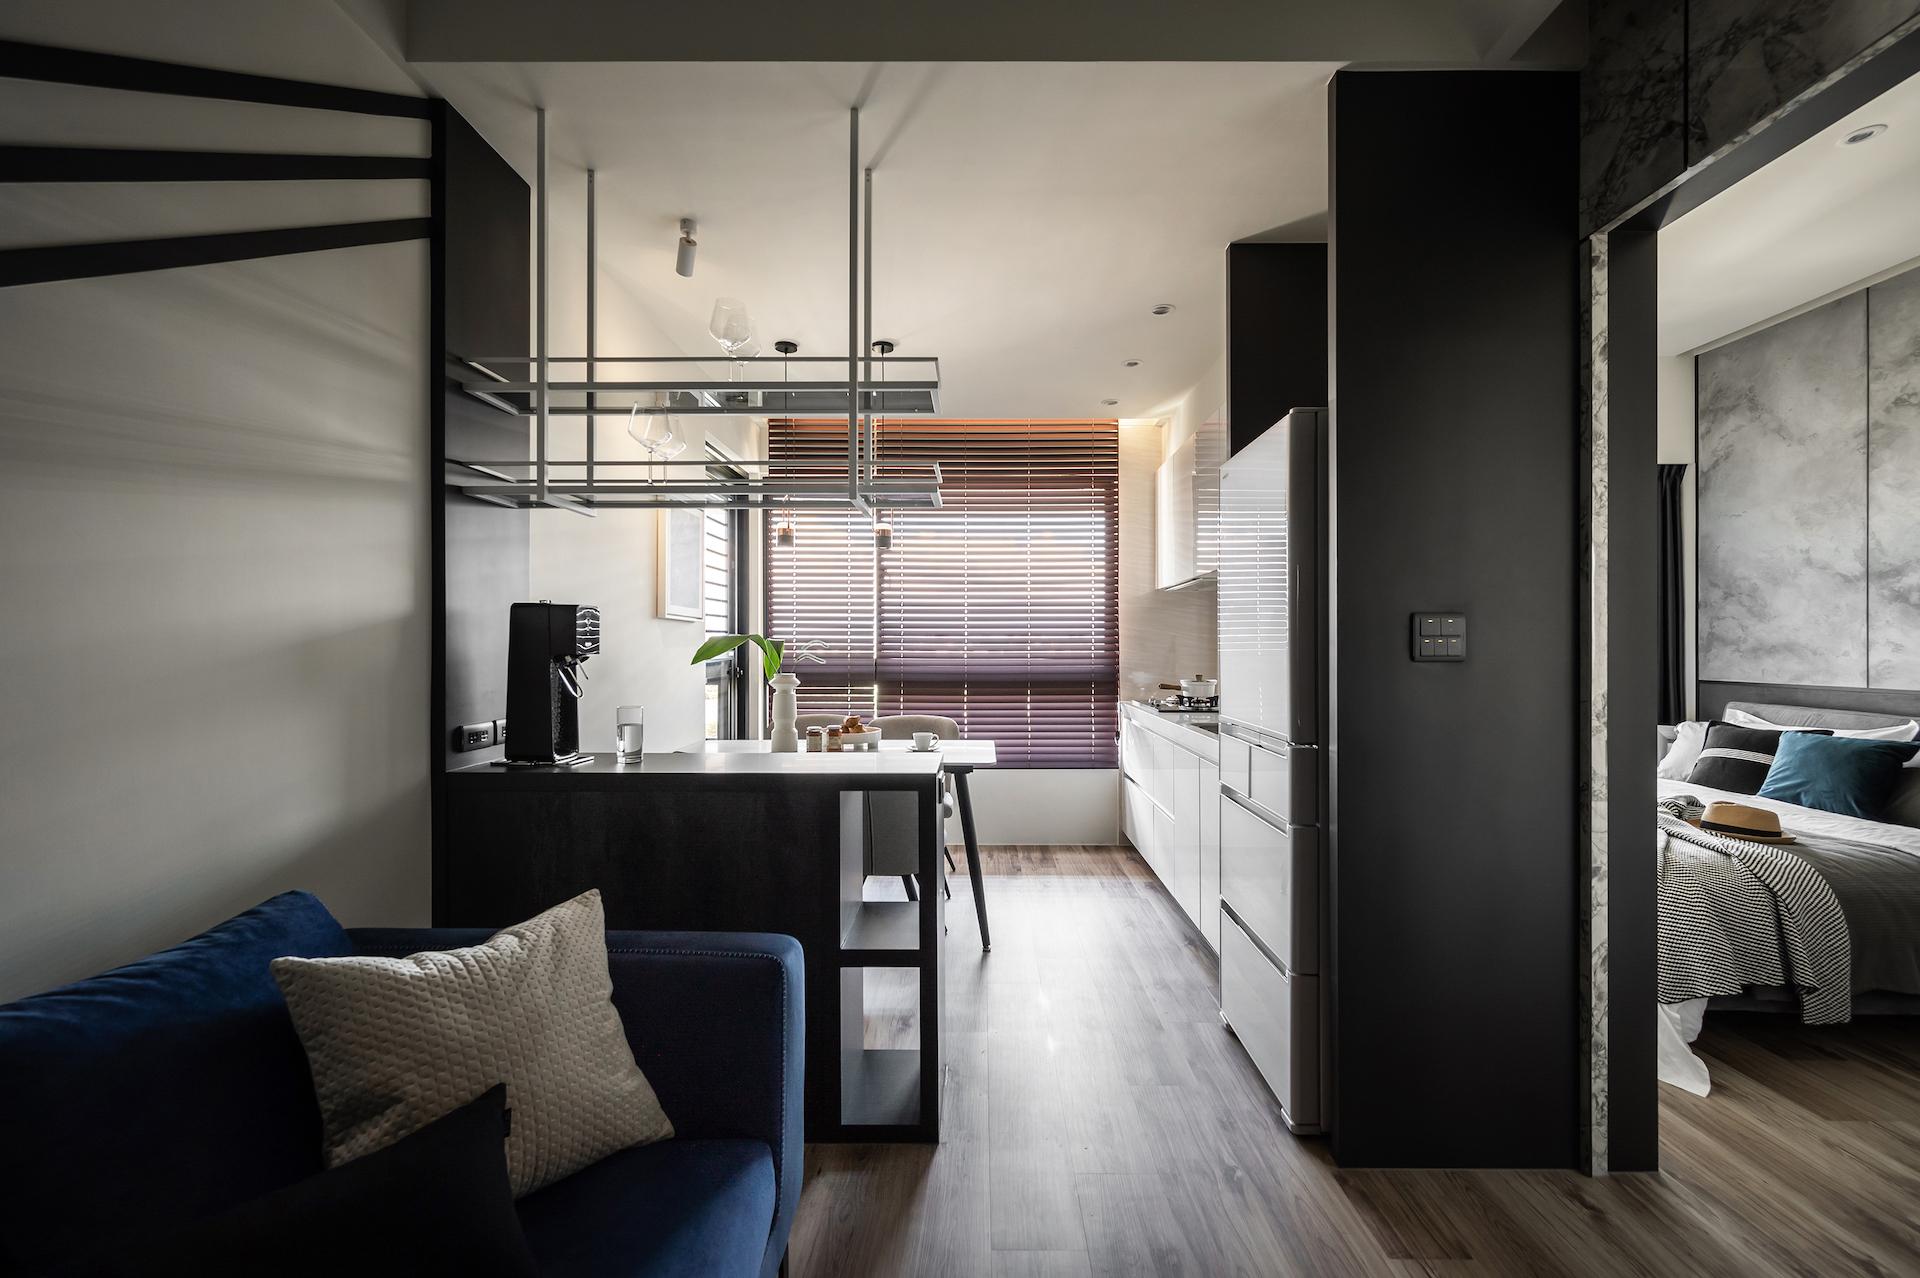 A 675-sq.ft. Stylish Taiwan Home with Built-In Cat-Friendly Features